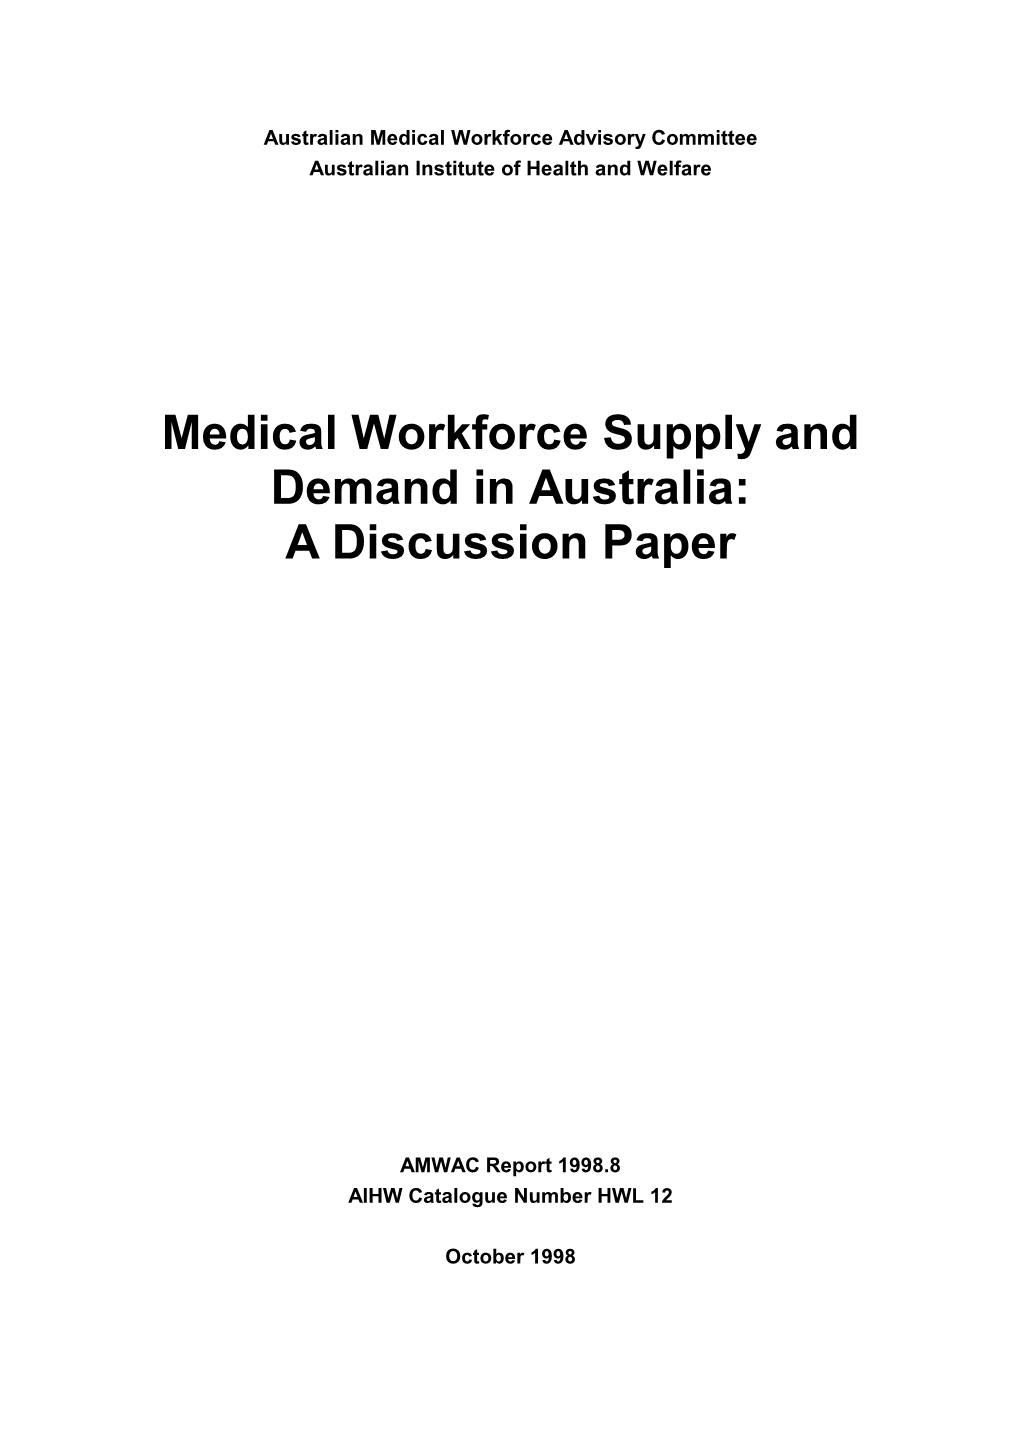 Medical Workforce Supply and Demand in Australia: a Discussion Paper